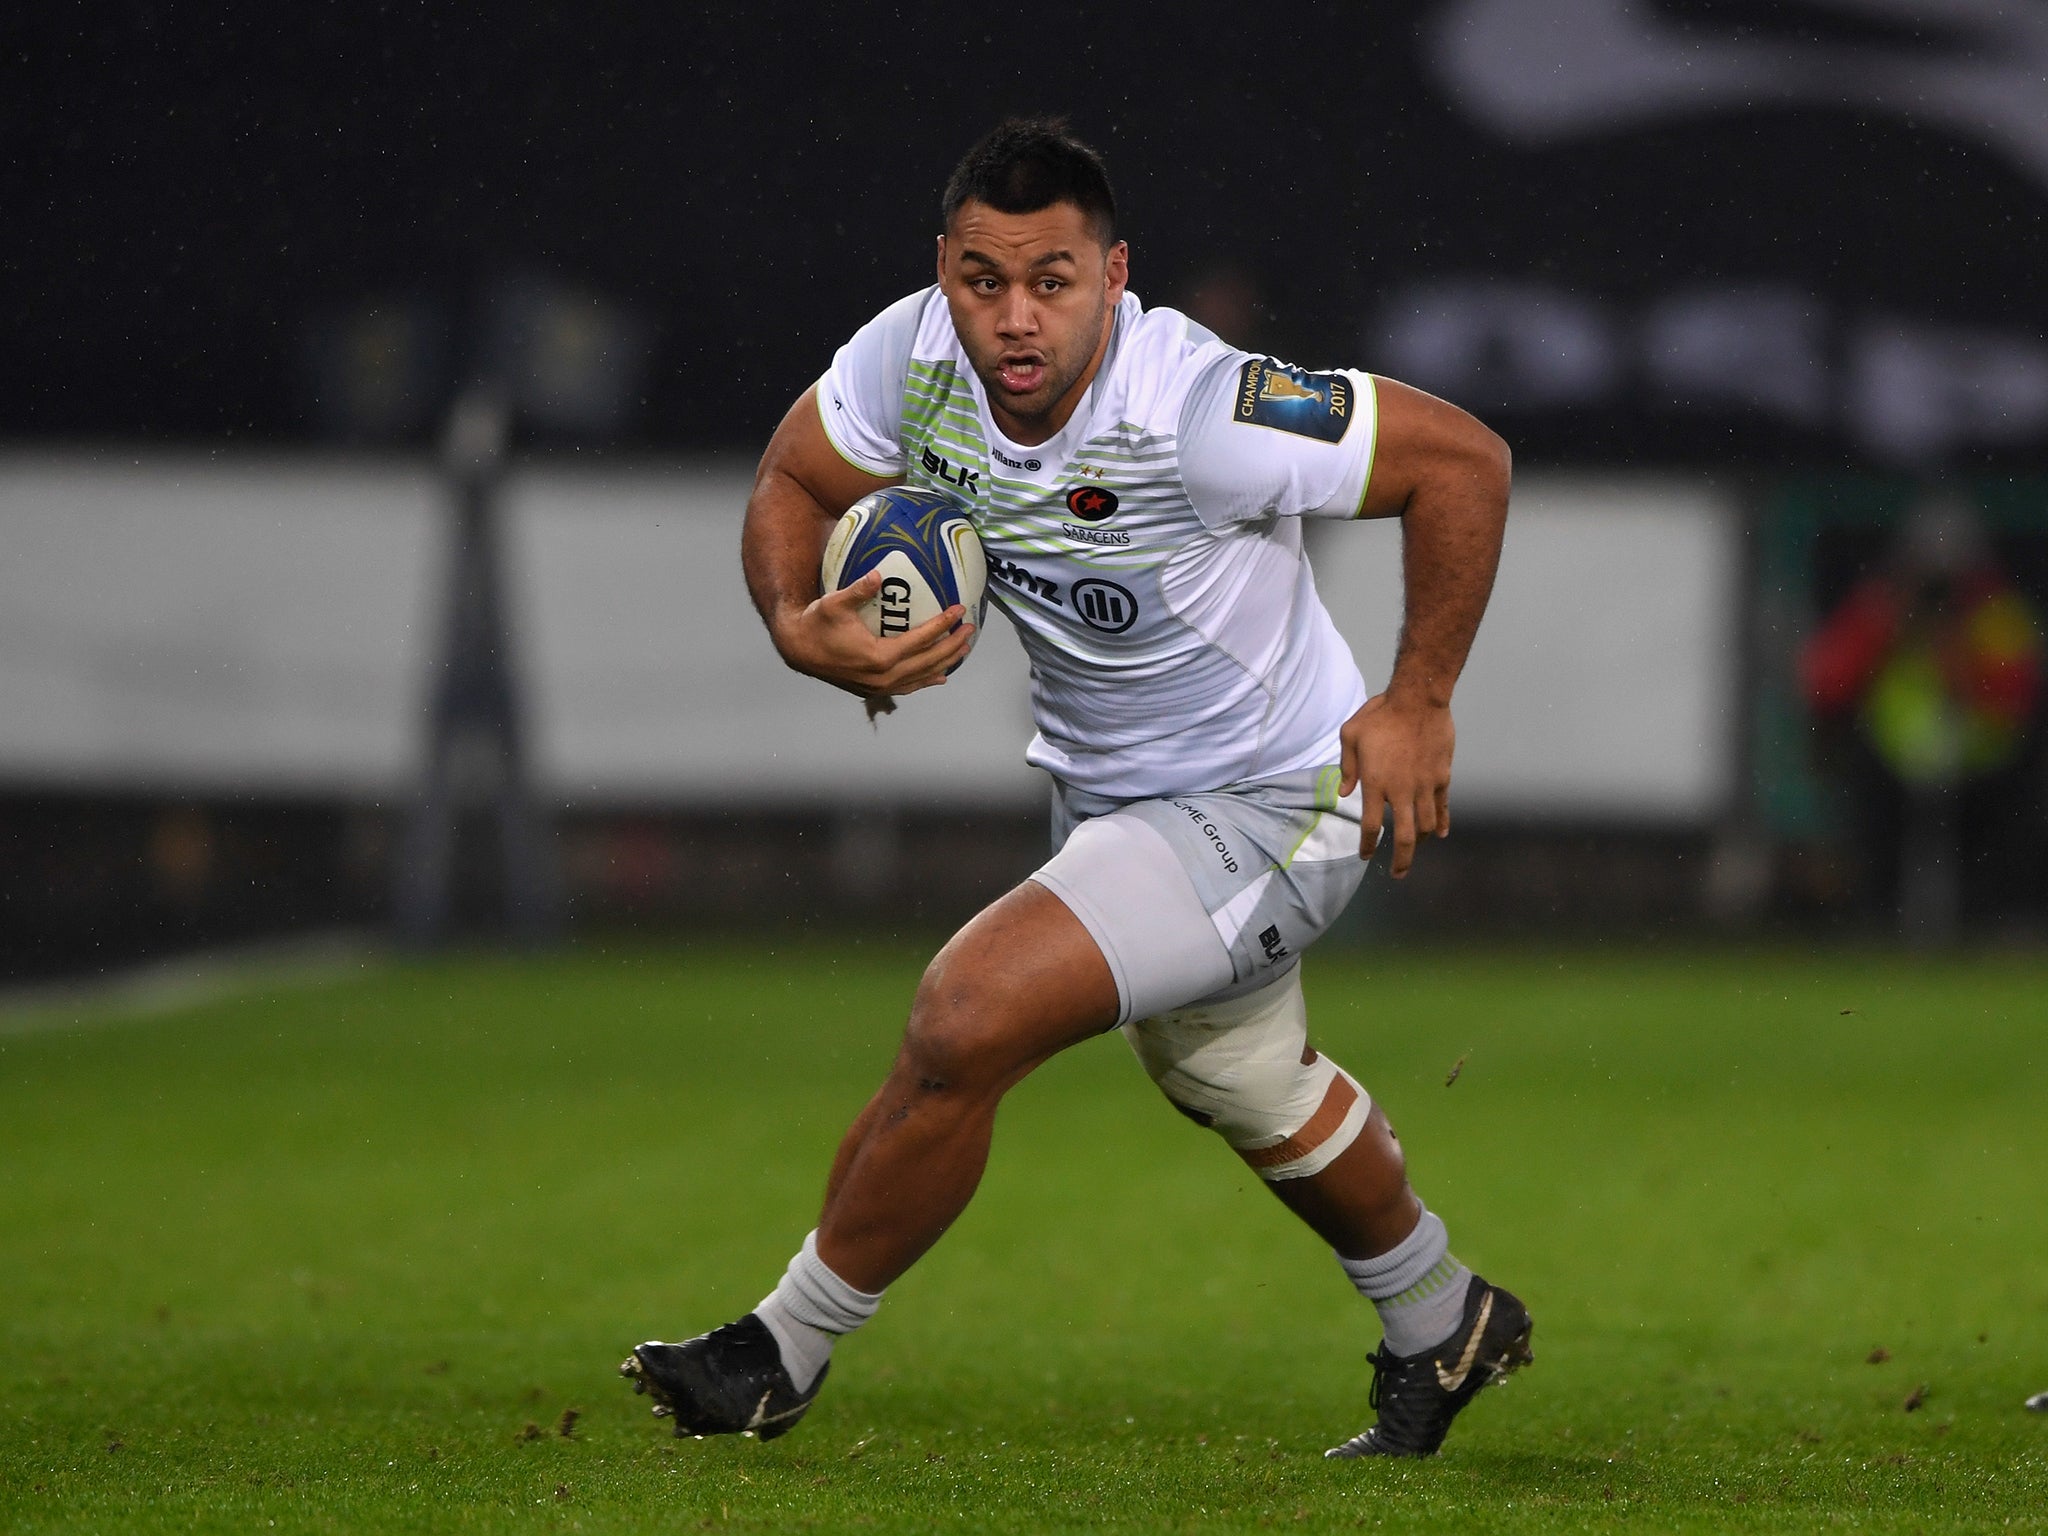 Vunipola has made one replacement appearance since mid-January